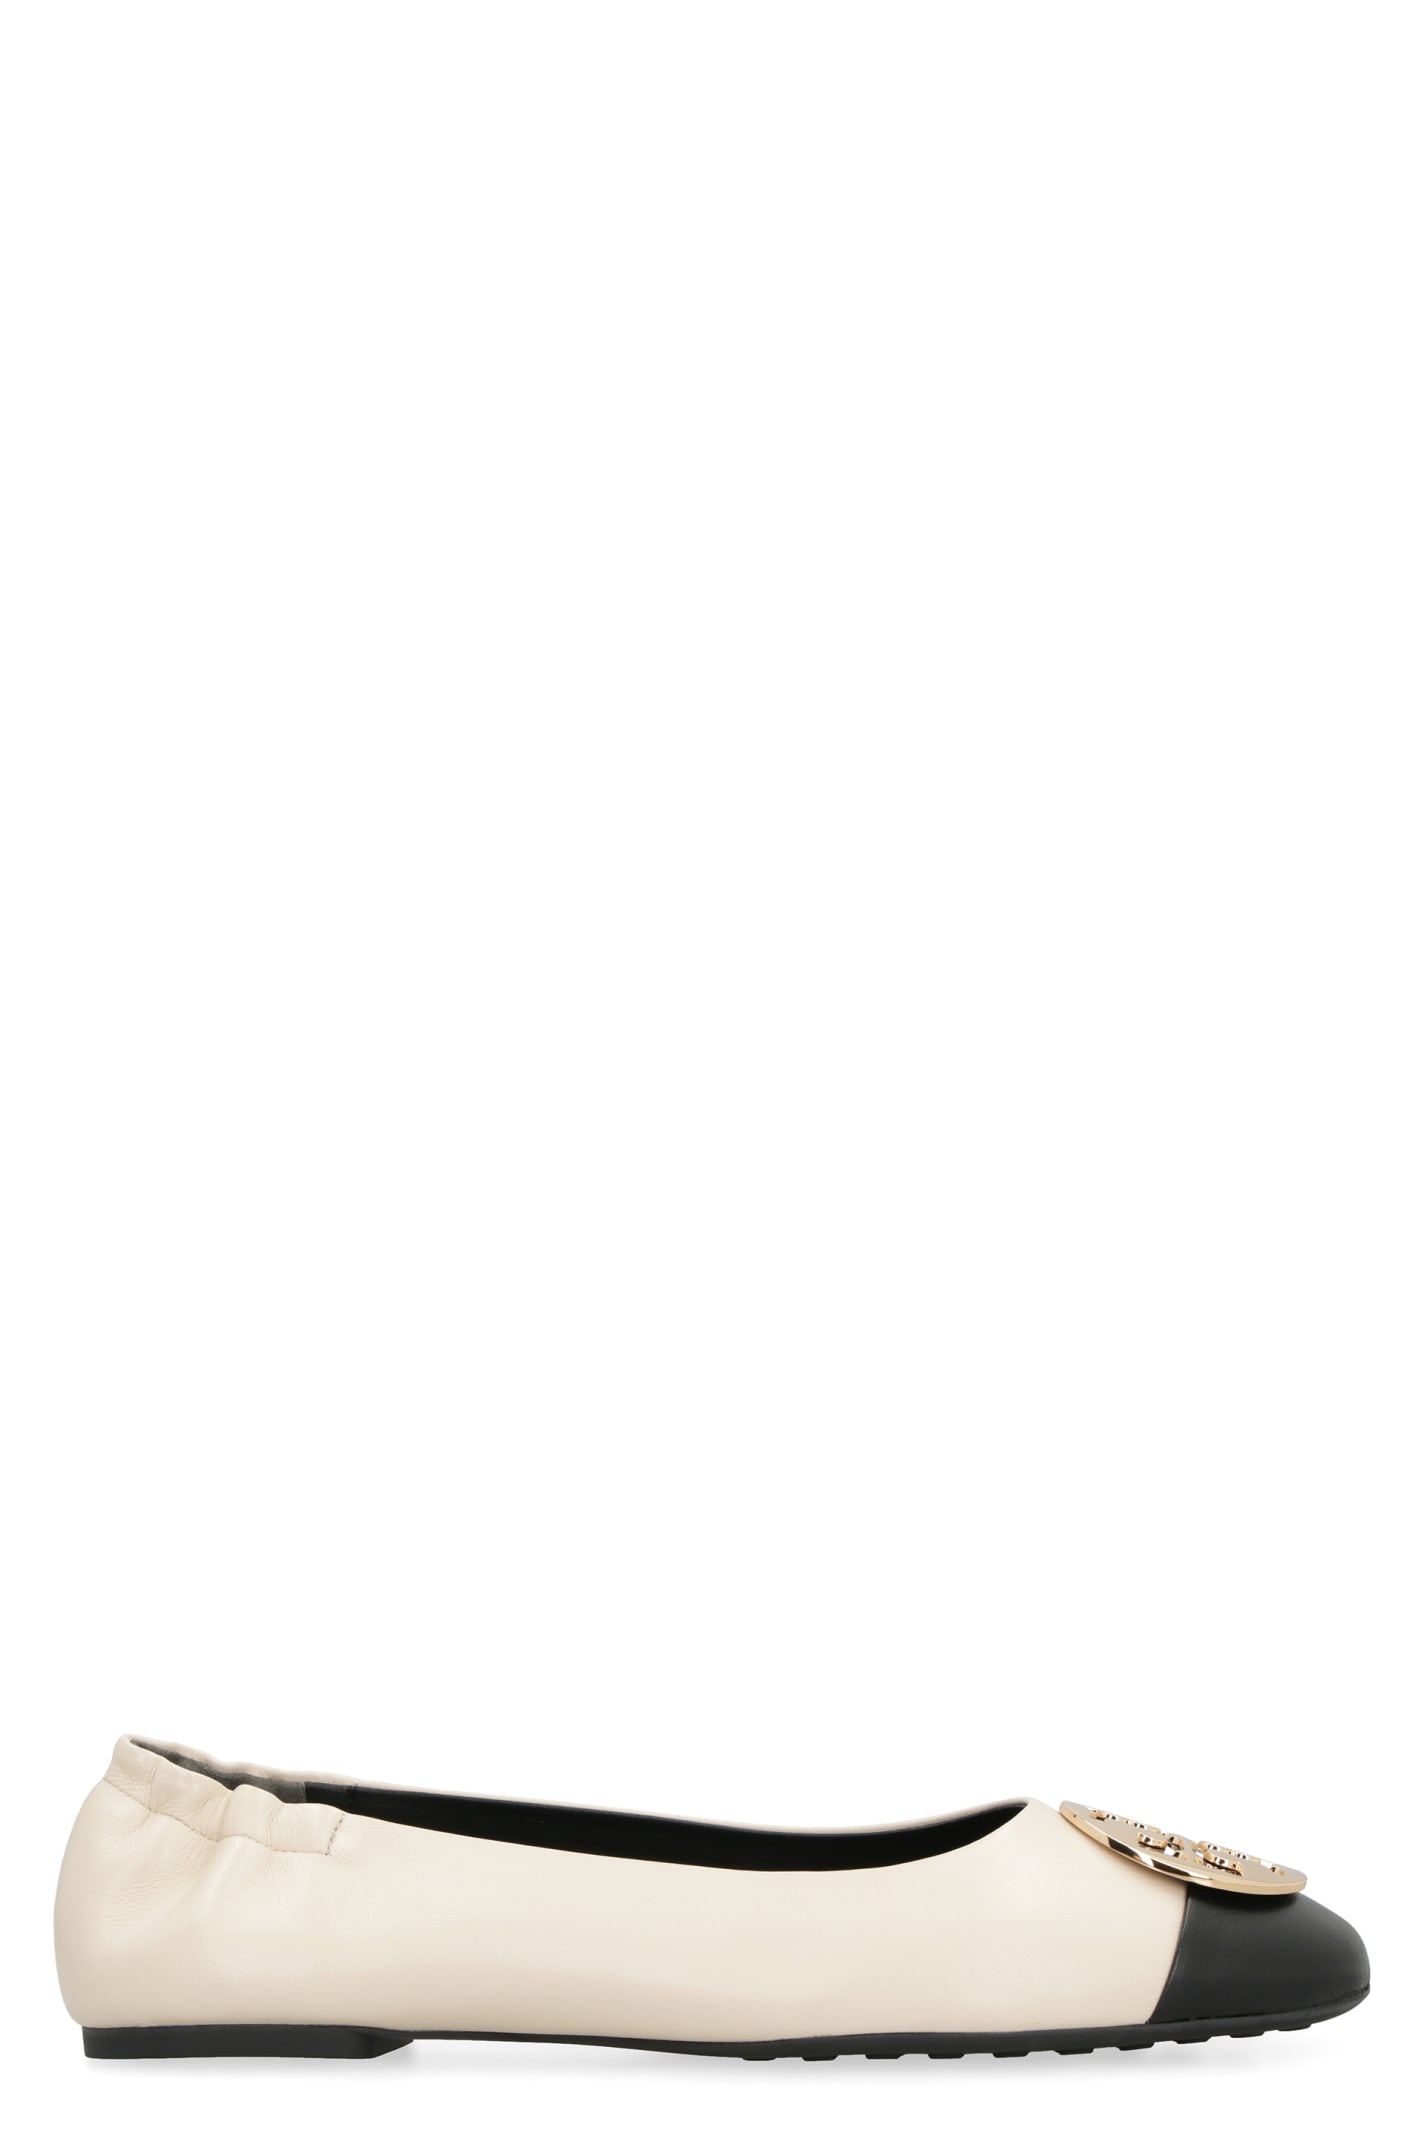 Tory Burch Claire Leather Ballet Flats In New Cream Black Gold